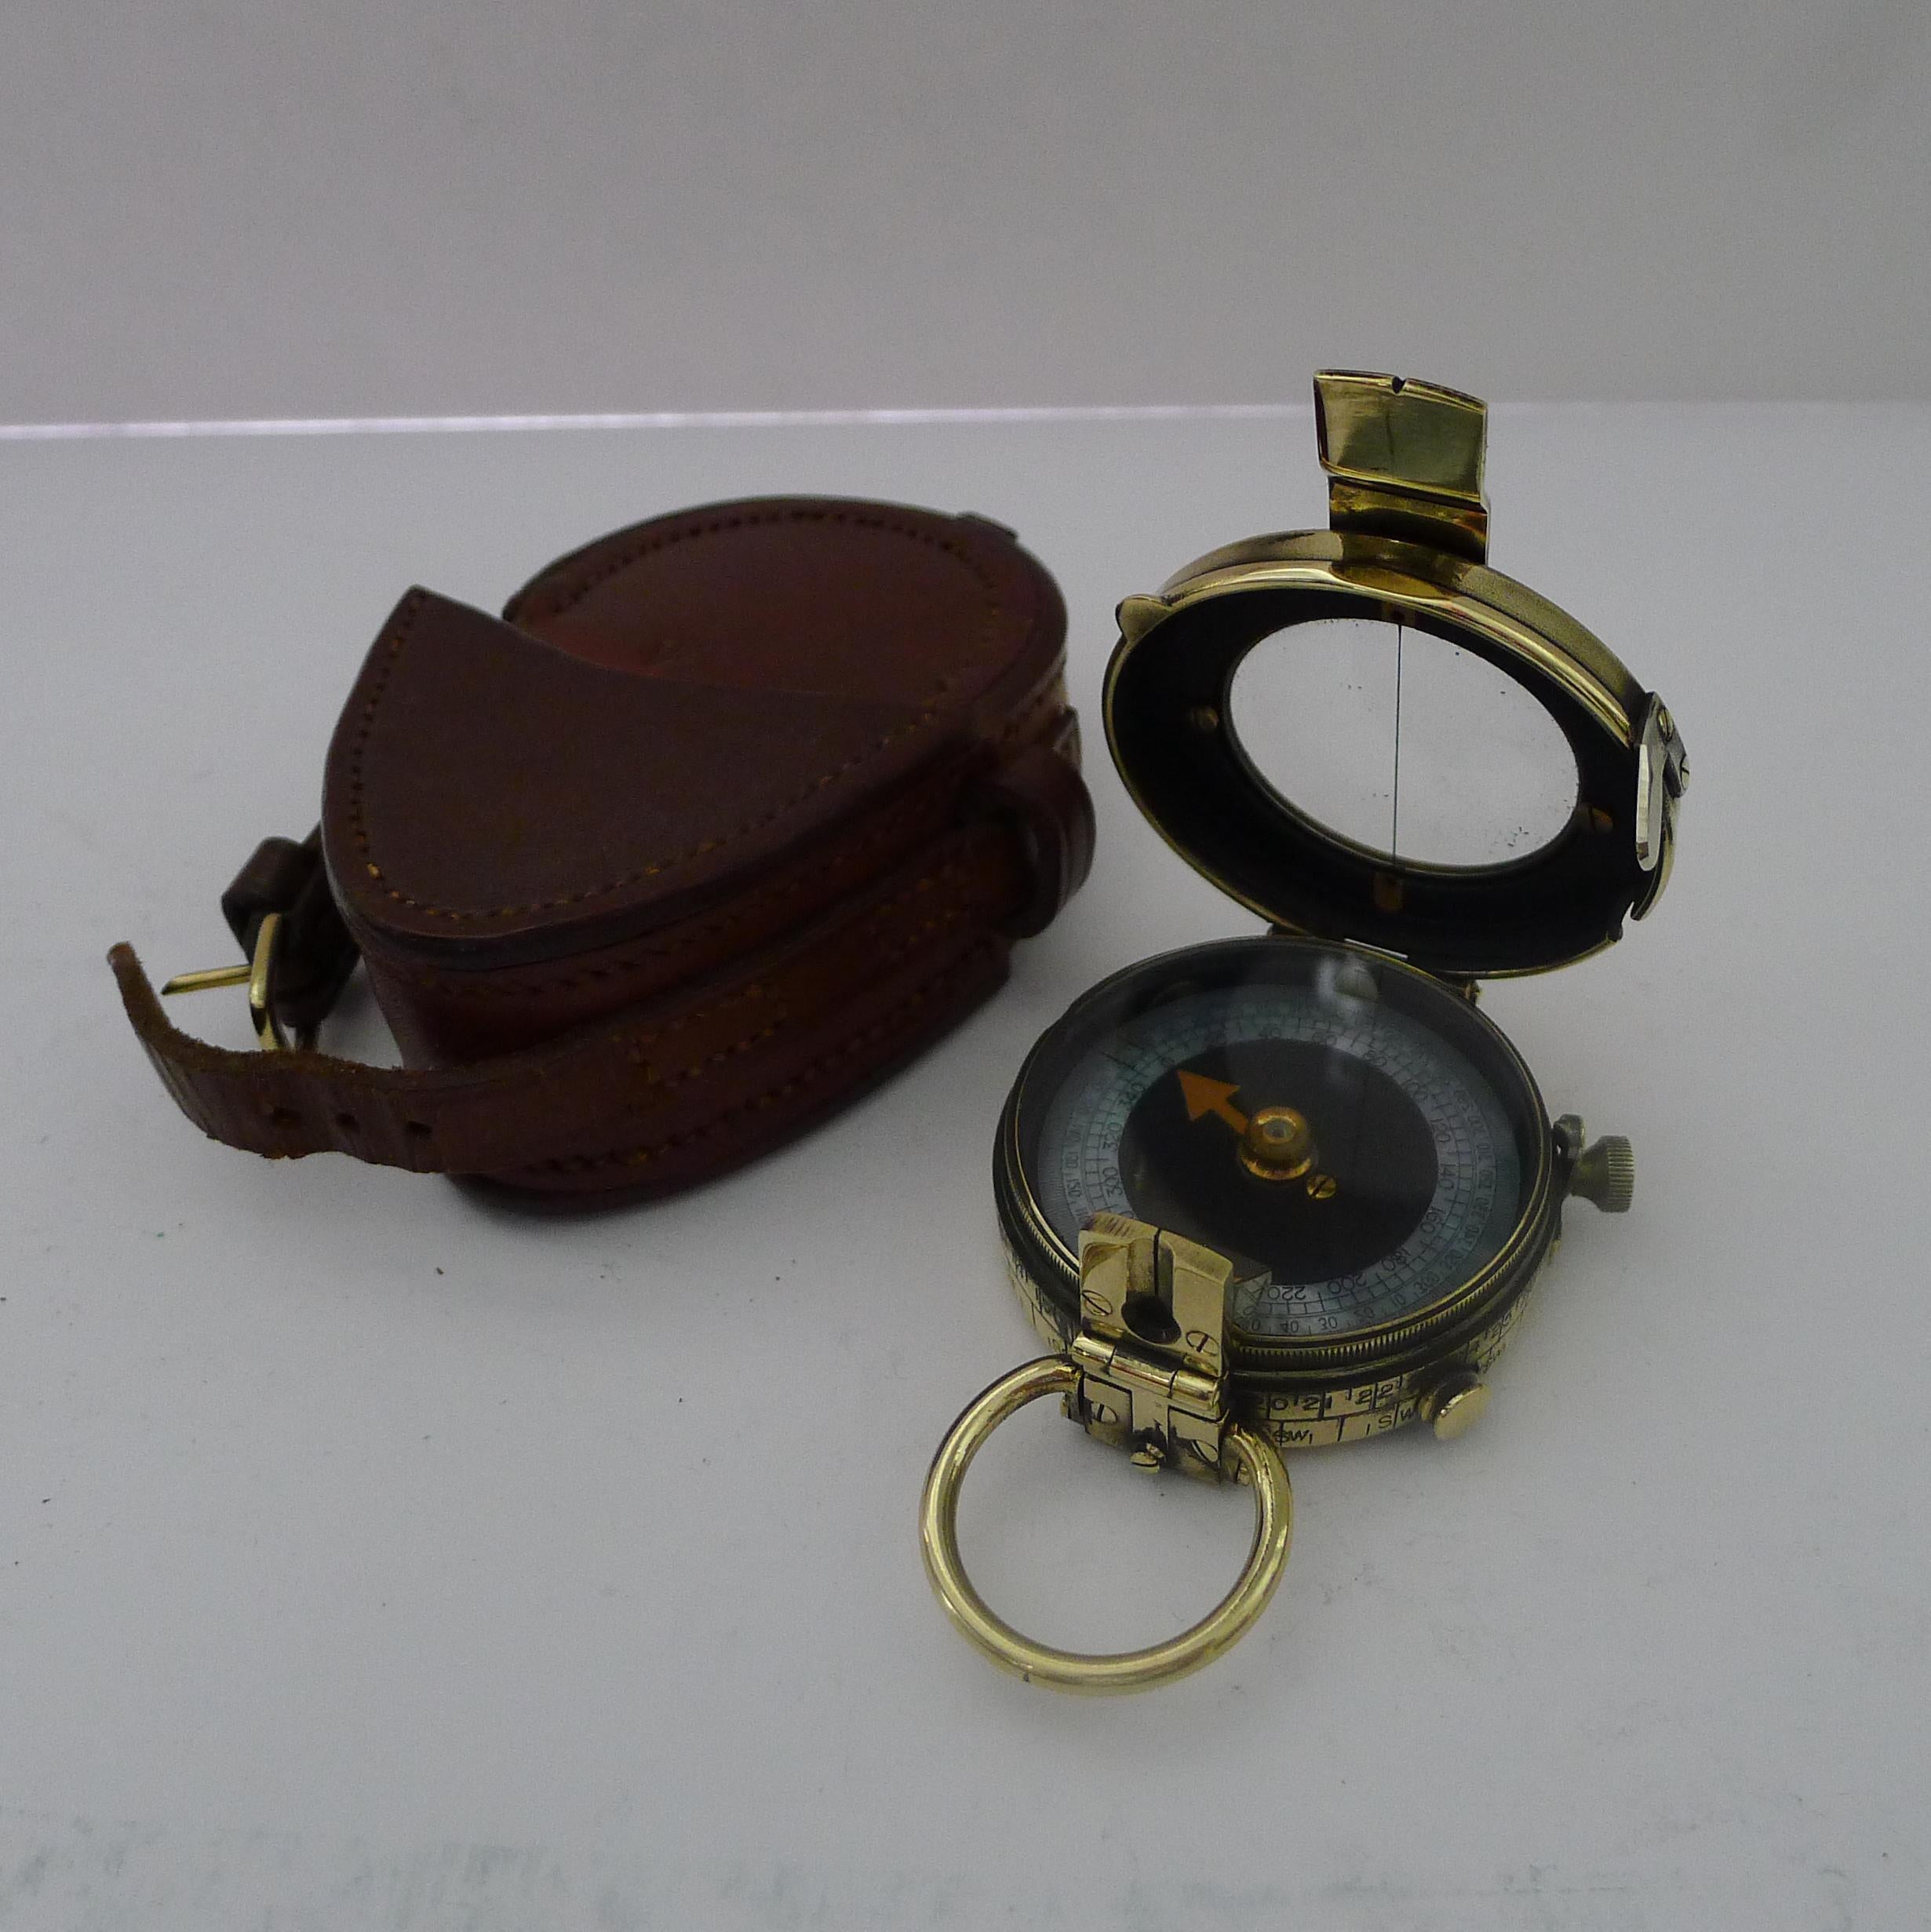 WW1 1917 British Army Officer's Compass, Verner's Patent MK VIII by French Ltd 2